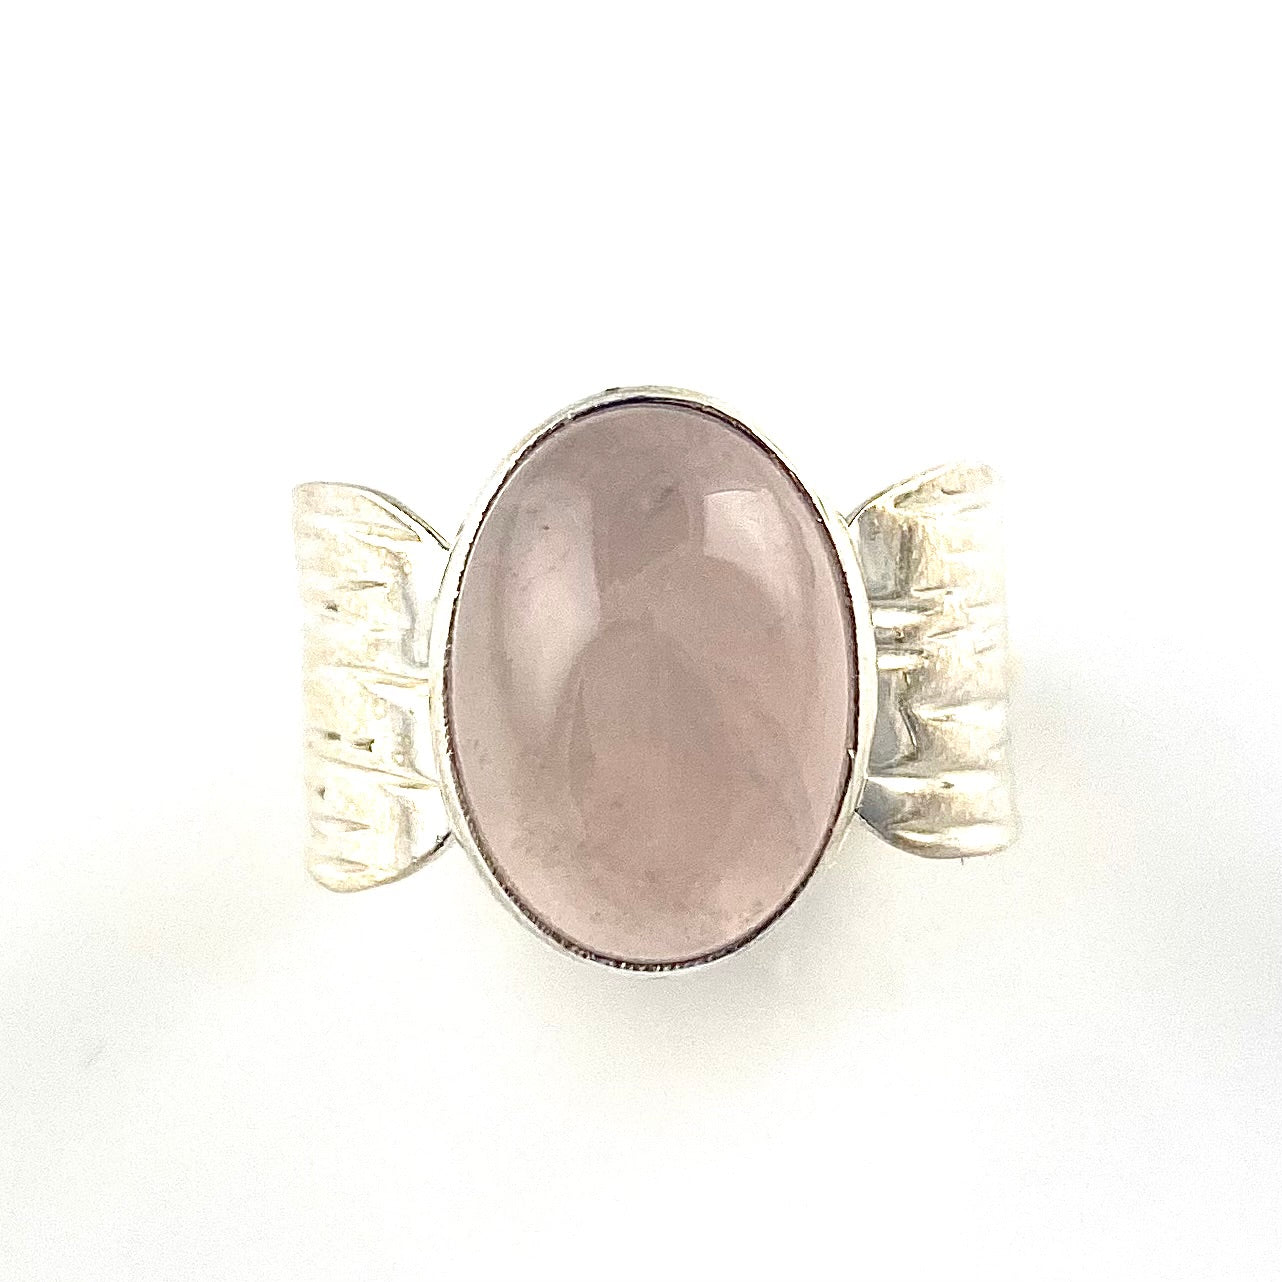 Rose Quartz - Pretty in Pink Oval - Sterling Silver Ring - Keja Designs Jewelry